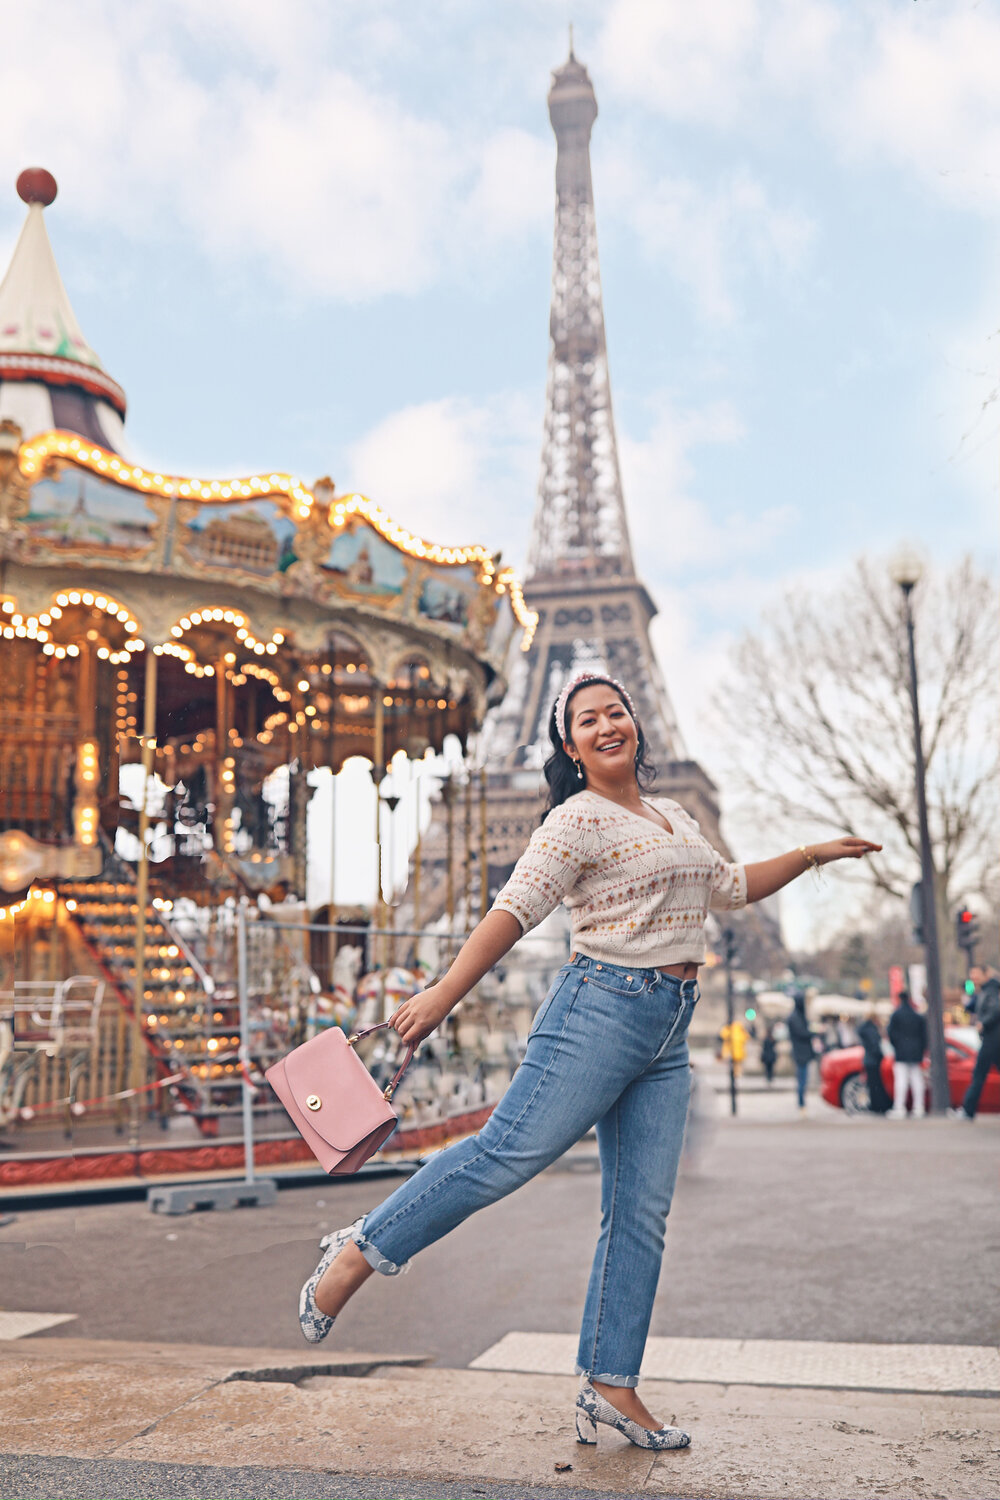 Carousel at the base of the Eiffel Tower Paris Instagramable Photo Location – Pink Purse and Zara Sweater 